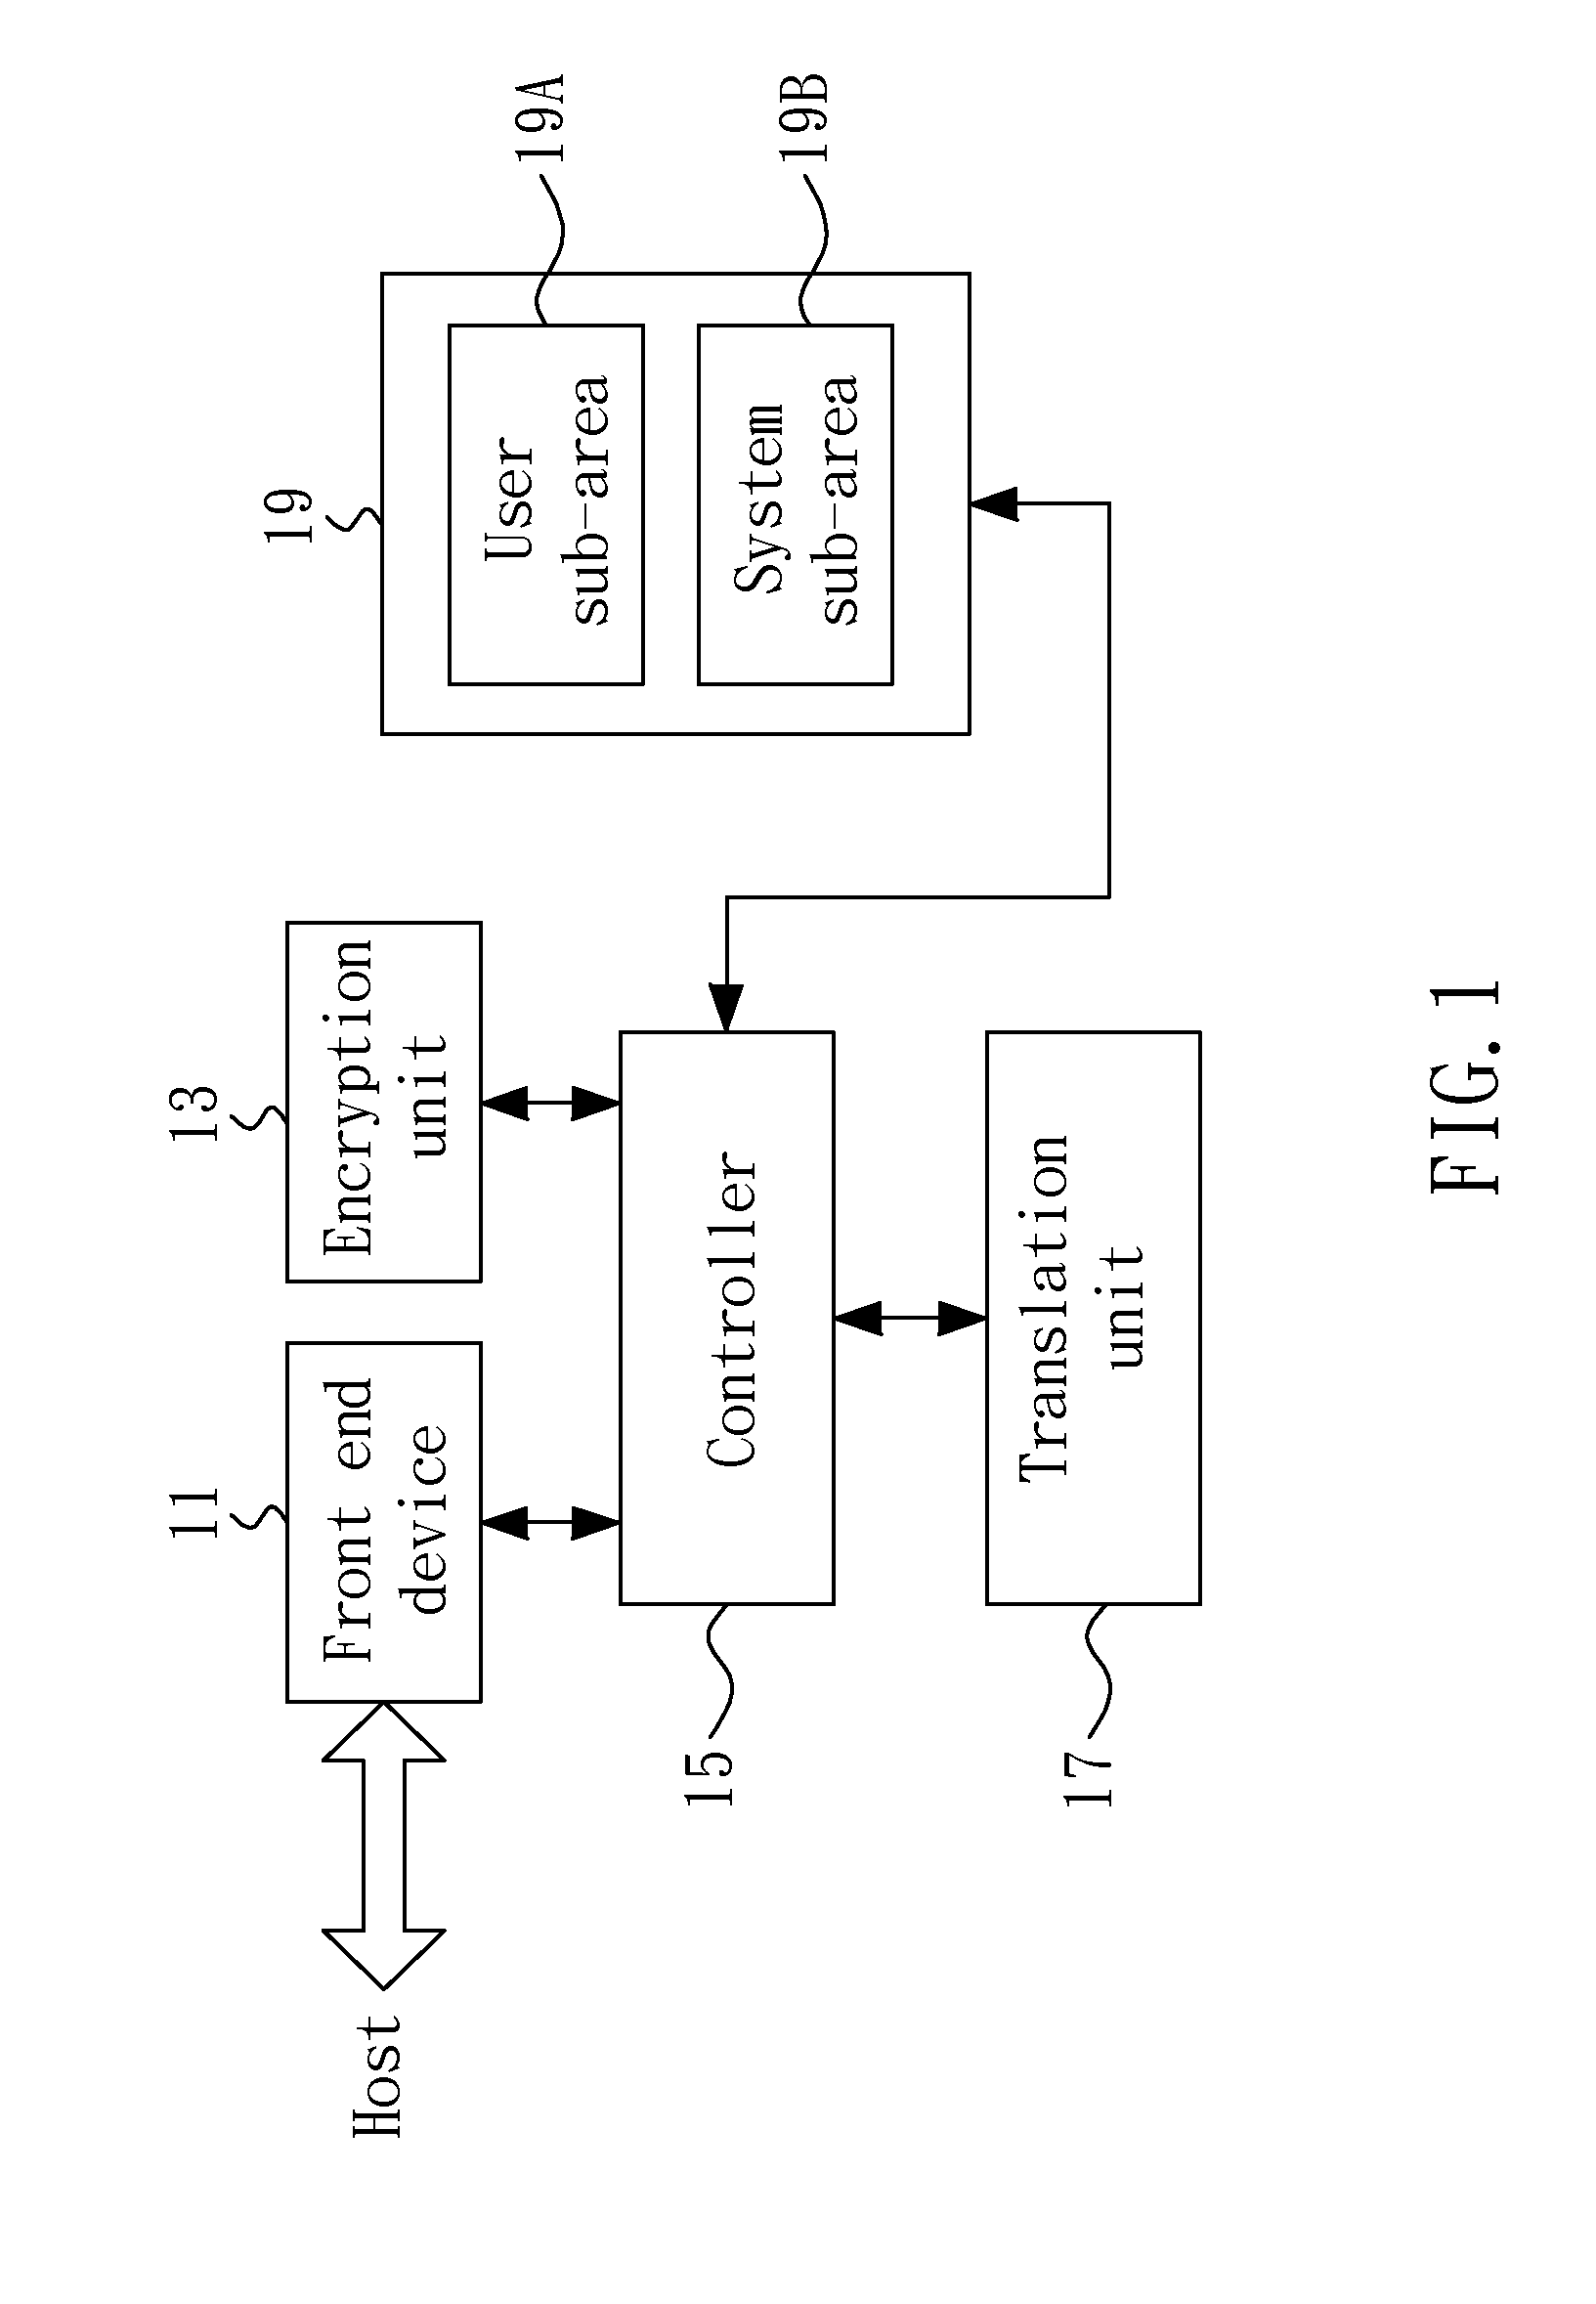 Secure erase system for a solid state non-volatile memory device